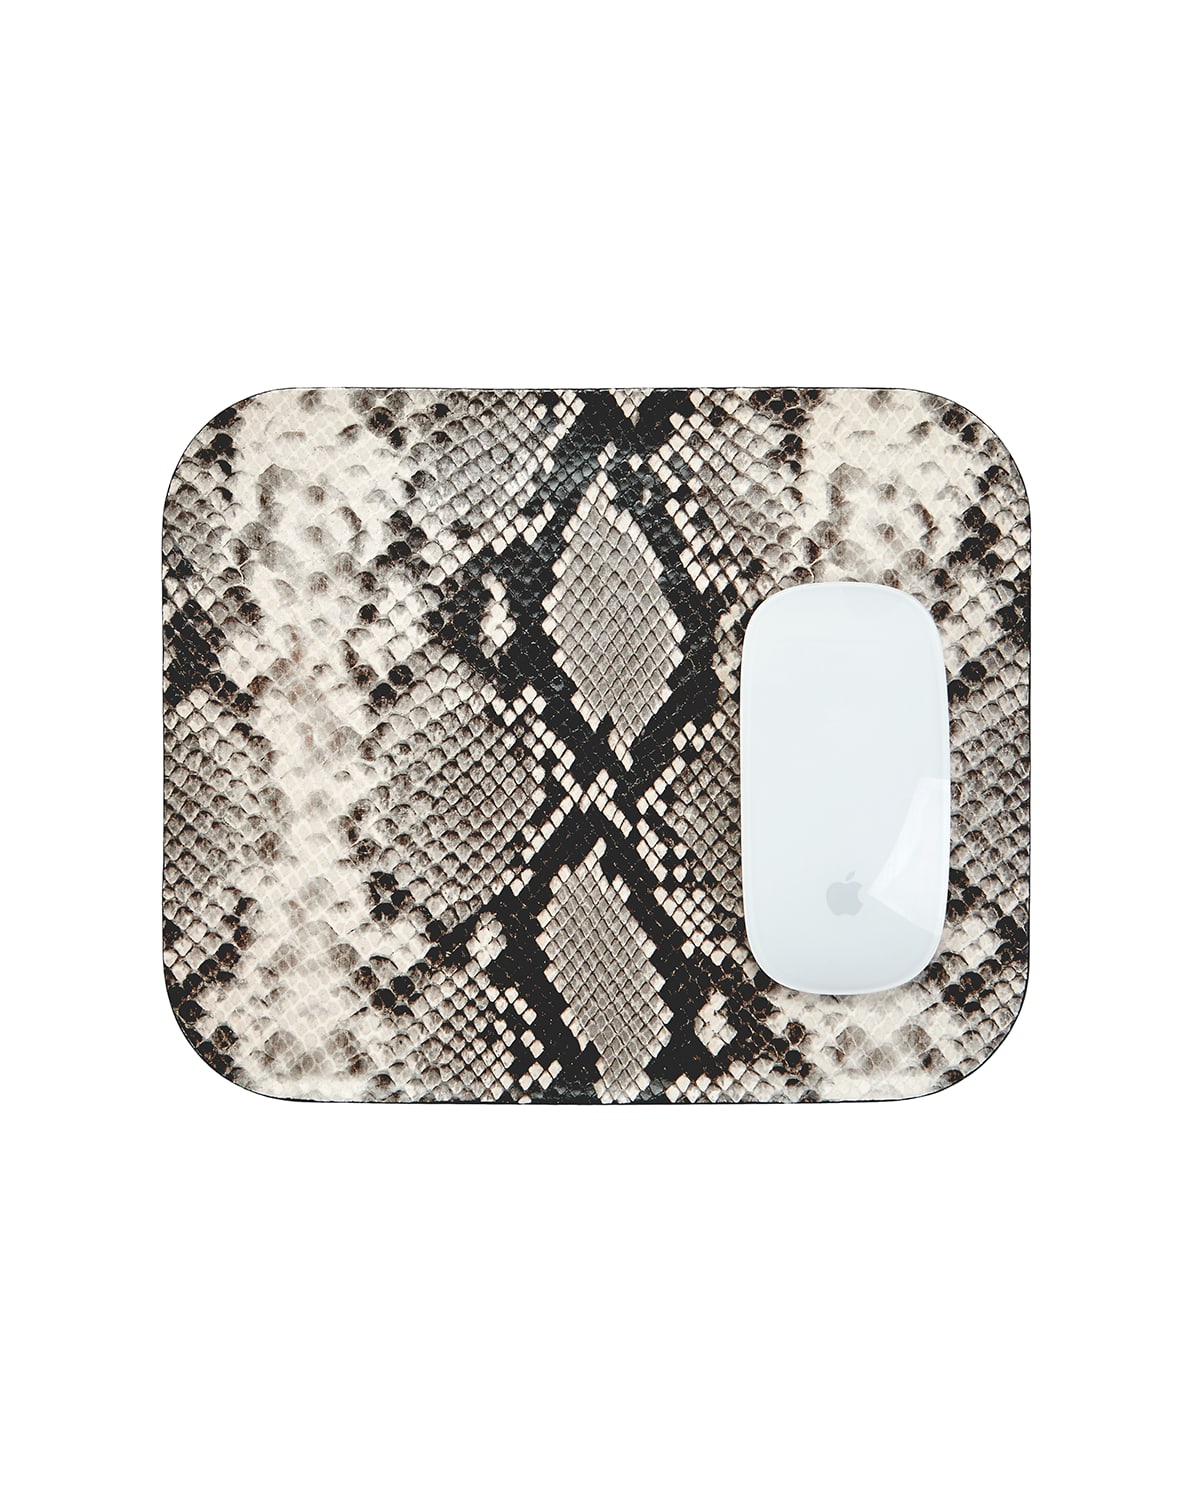 Shop Graphic Image Mousepad In Natural